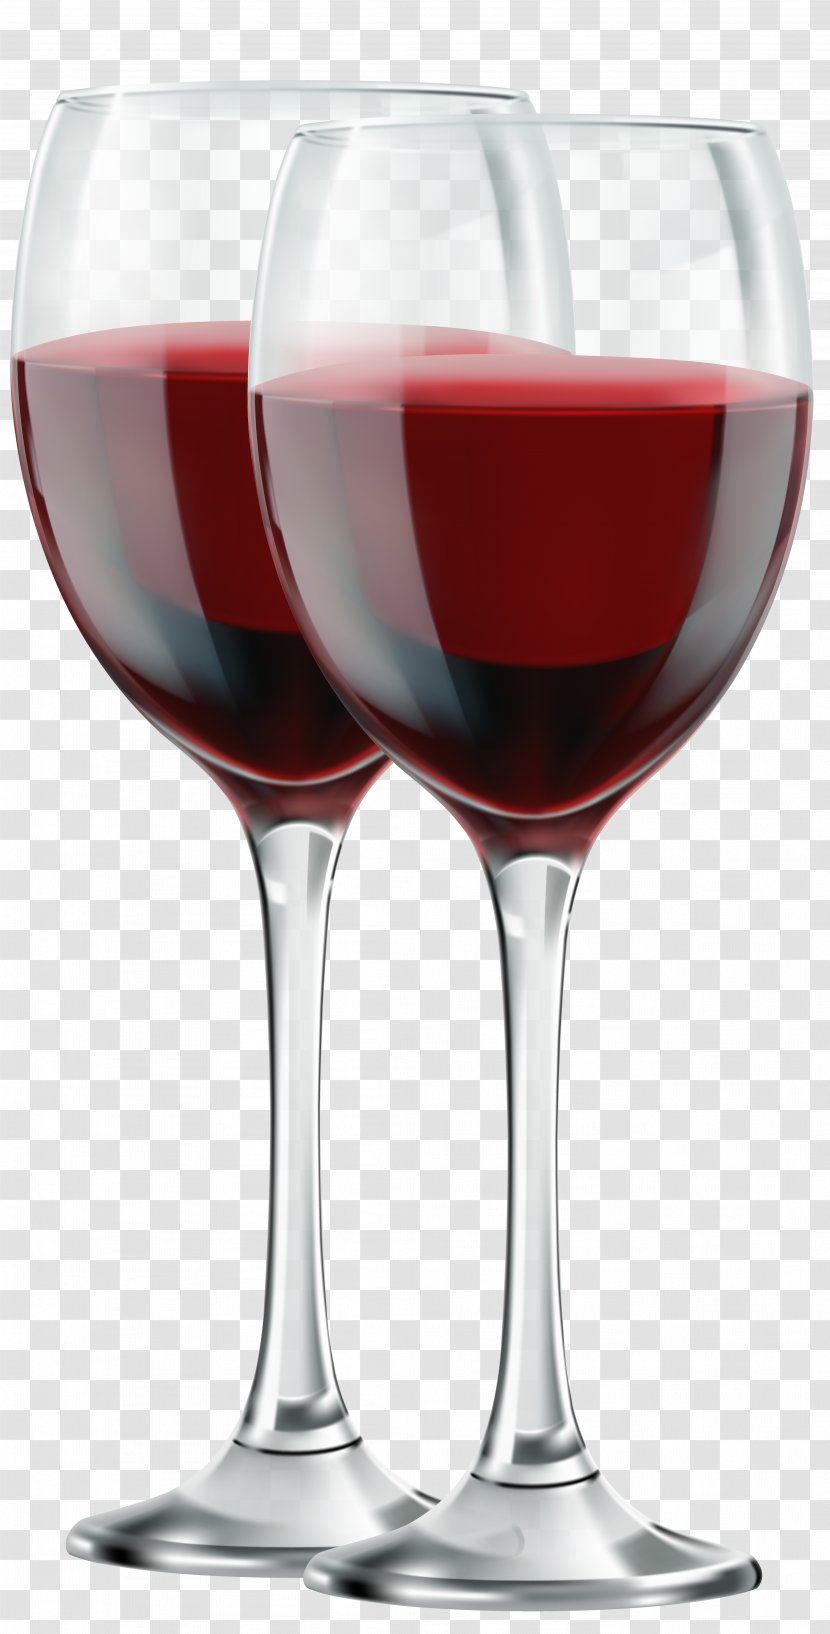 Red Wine Cabernet Sauvignon Champagne - Glass - Two Glasses Of Clip Art Image Transparent PNG